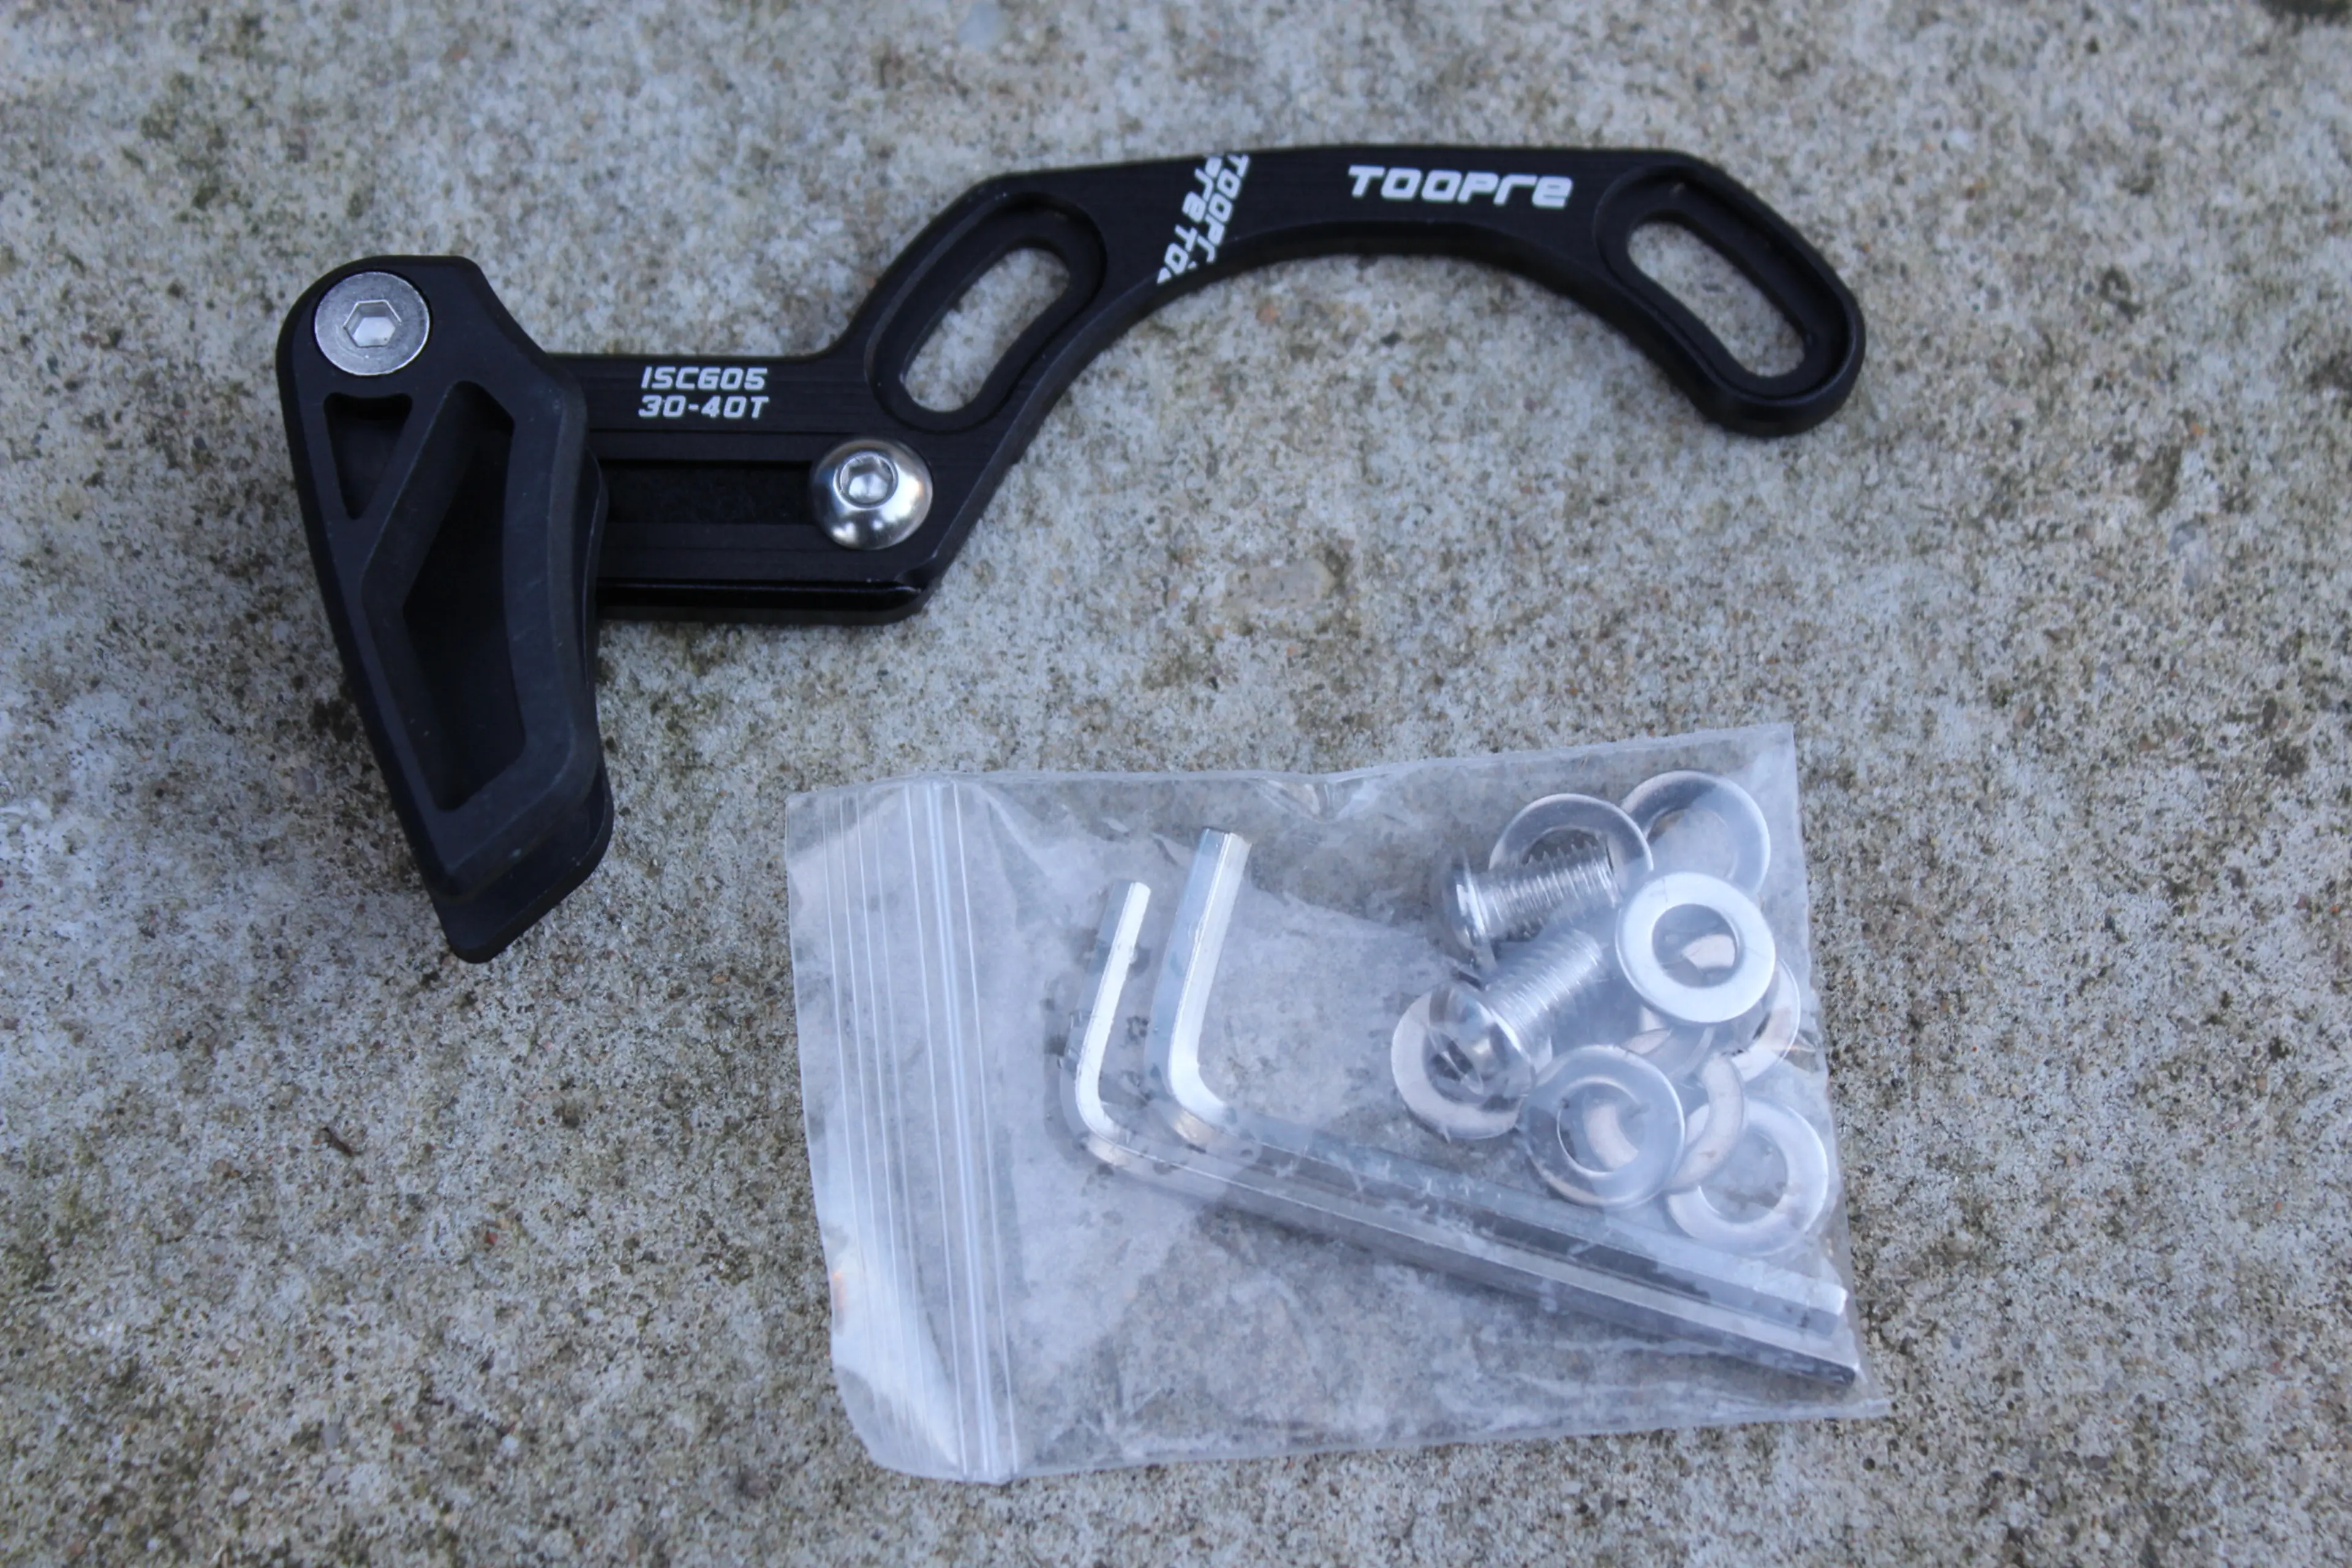 Image Toopre Flip-Guide Wide UltraLight CNC - ISCG-05 Chain Guide